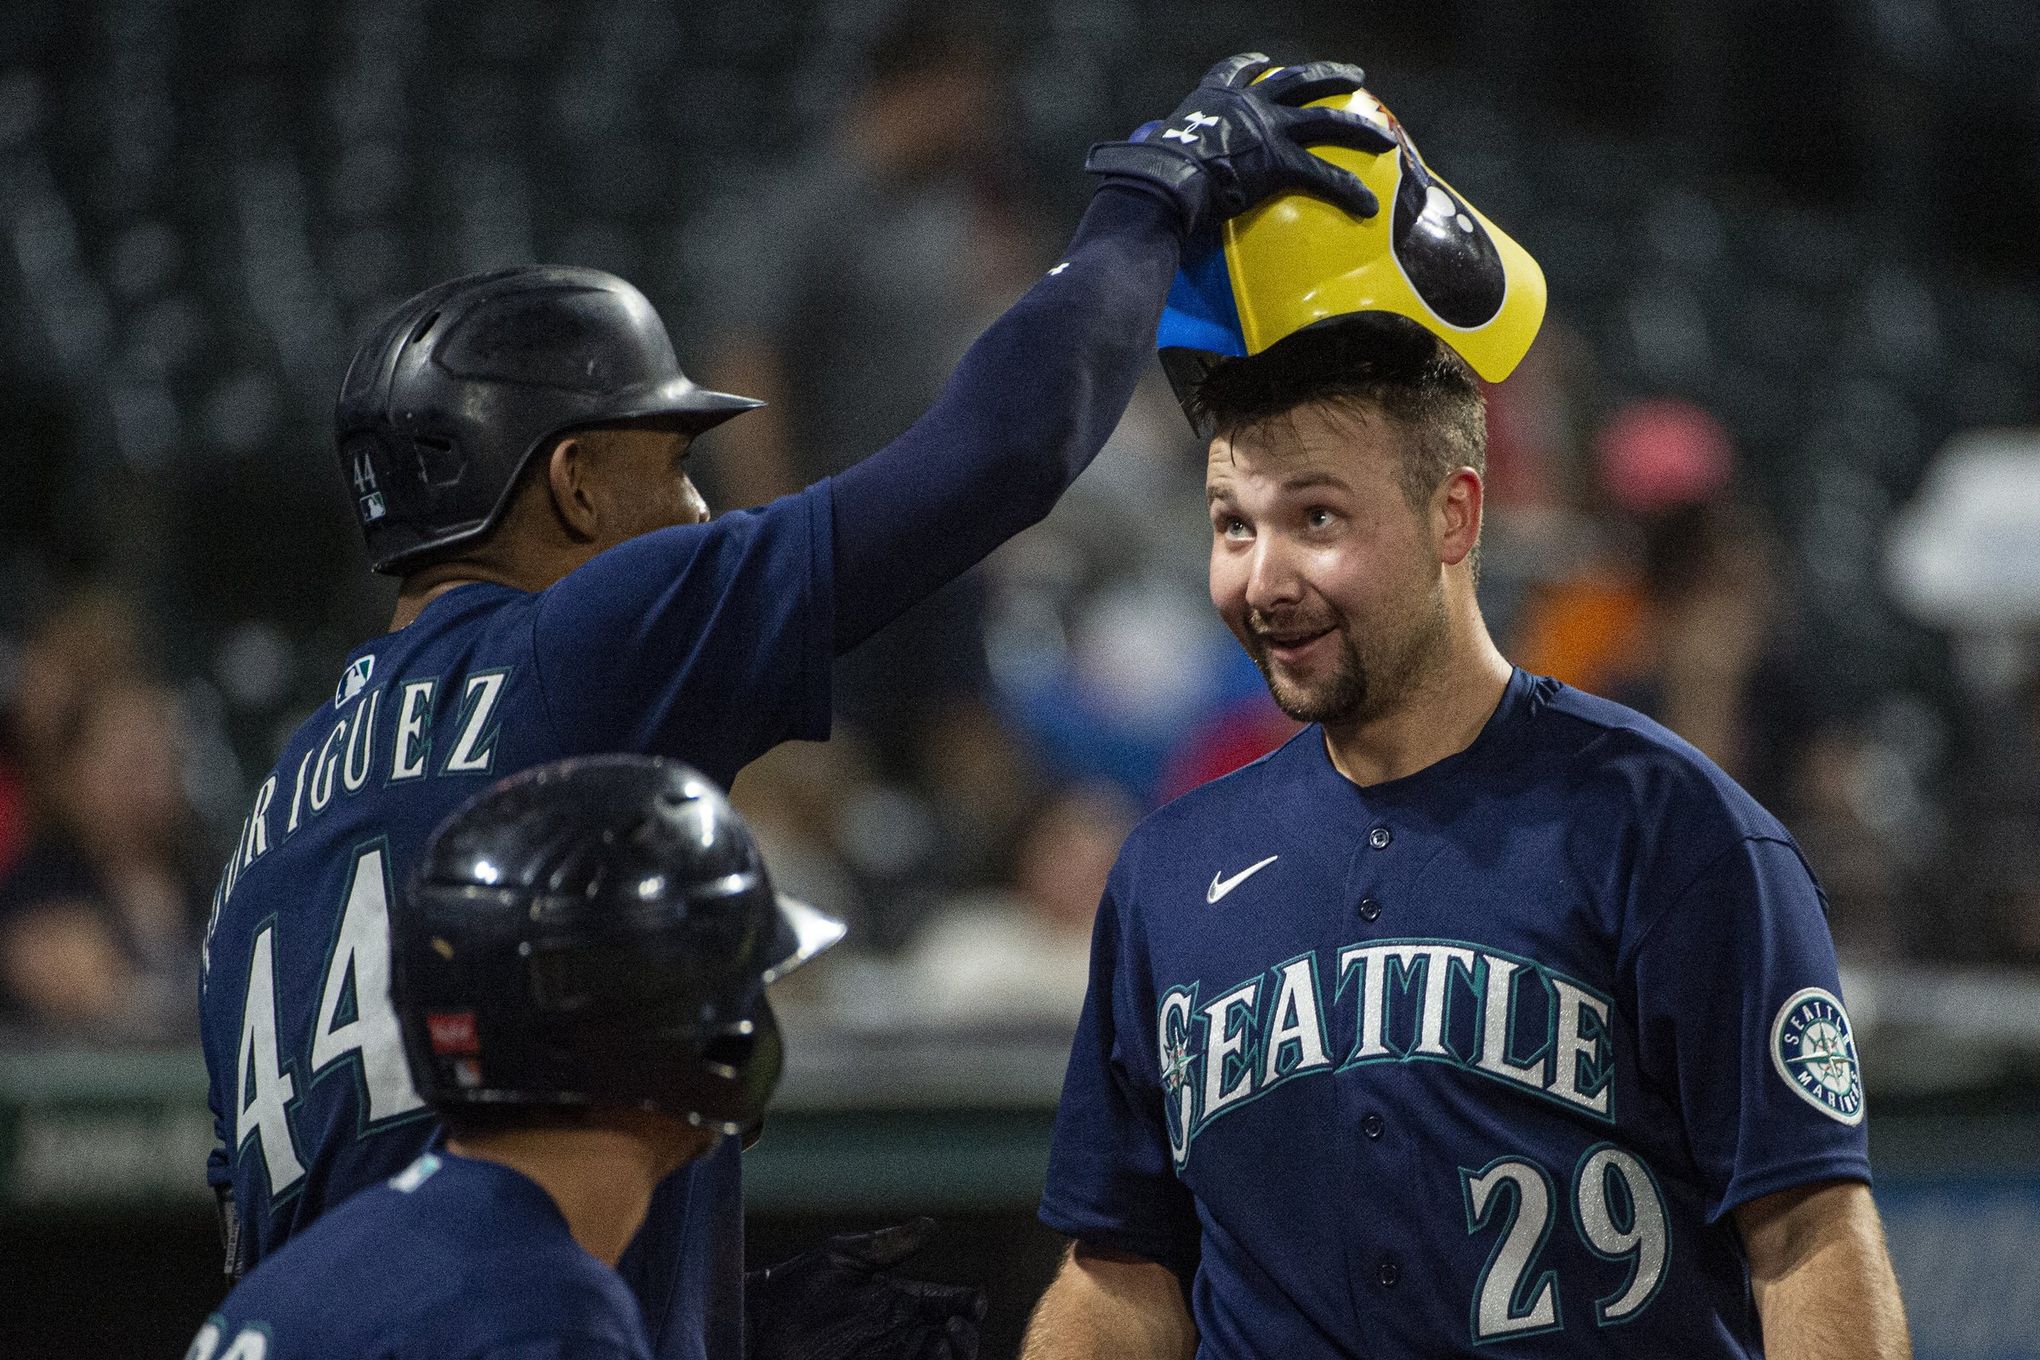 Back-and-forth slugfest helps Mariners avoid road sweep